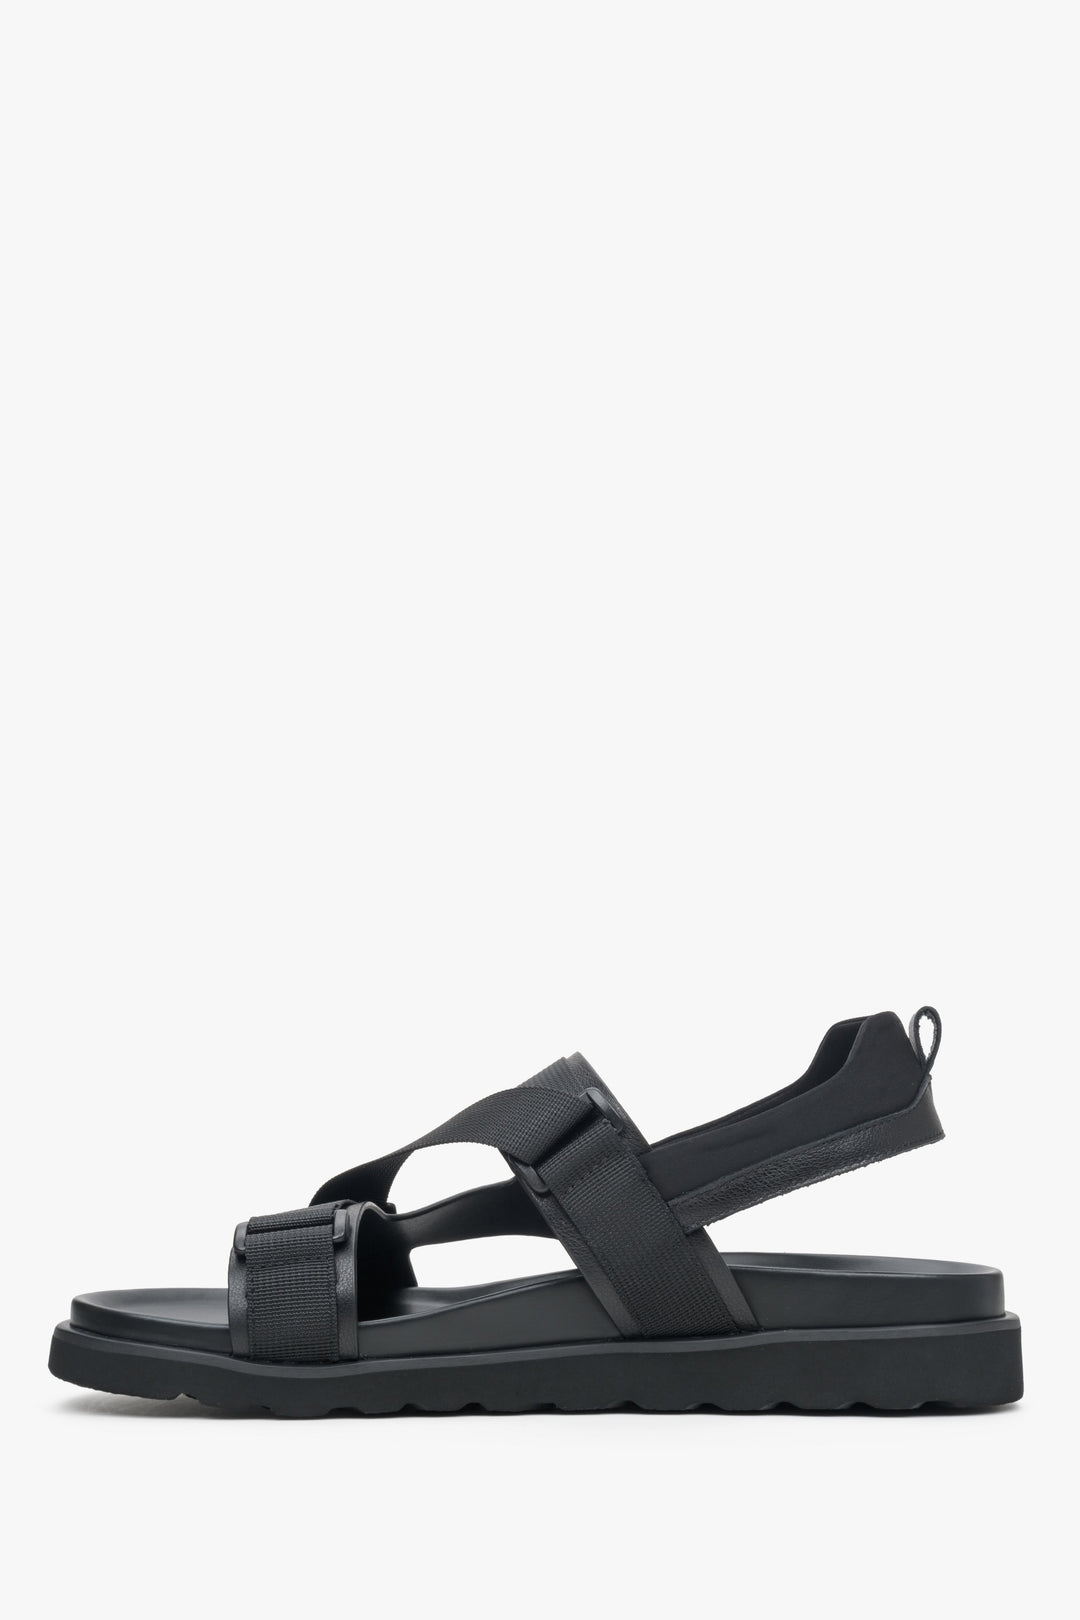 Comfortable, soft men's Estro sandals with thick buckle-fastened straps - shoe profile.